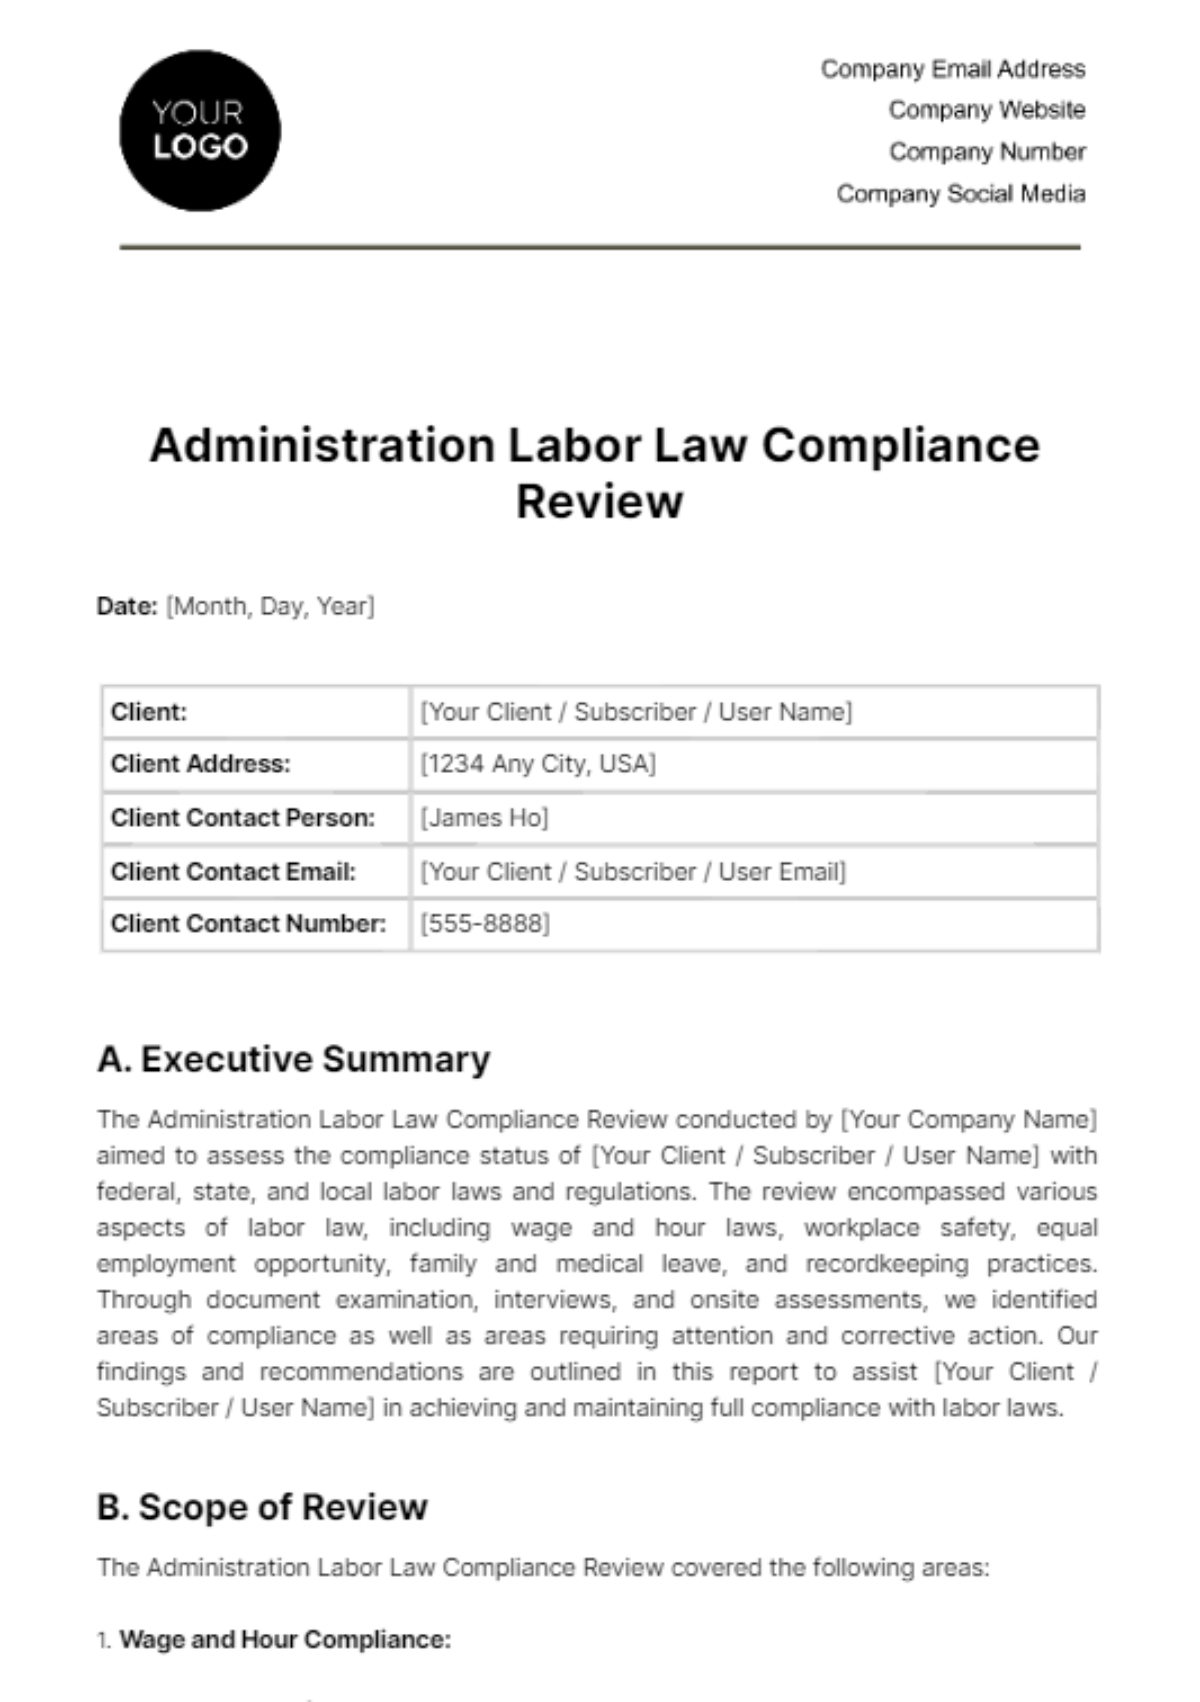 Administration Labor Law Compliance Review Template